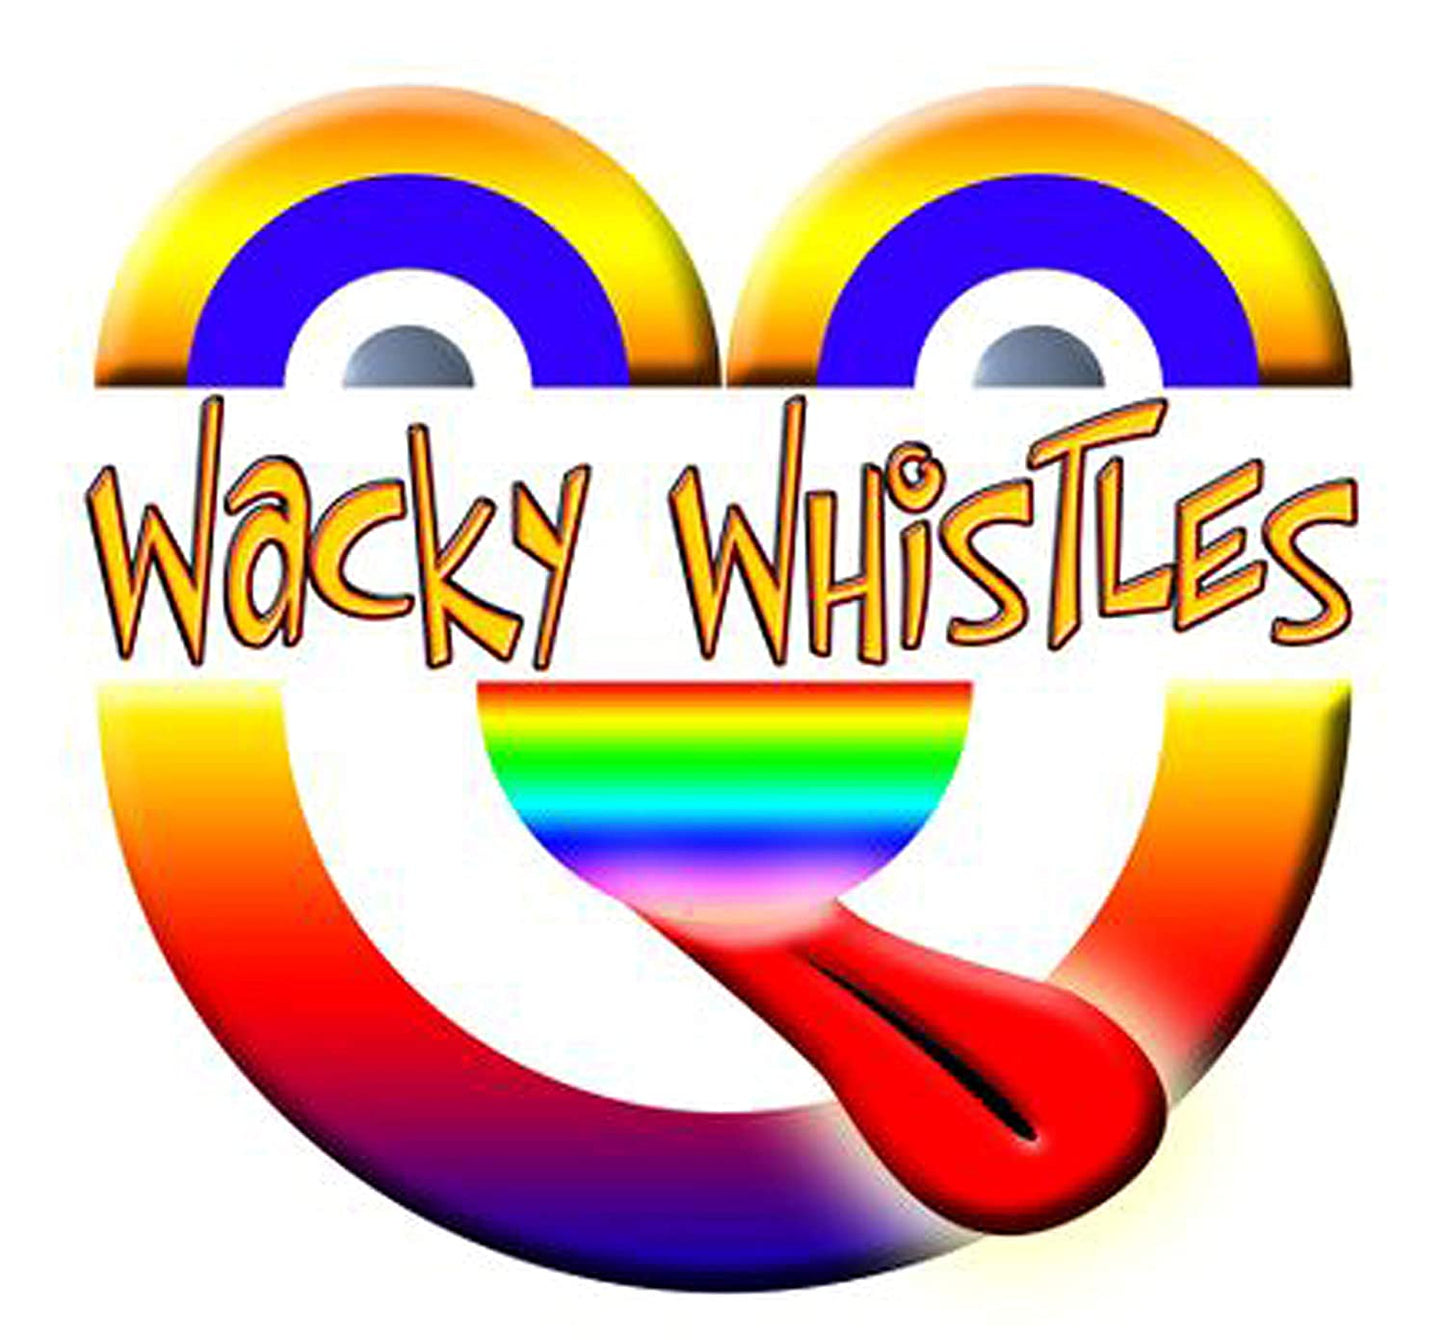 The Wacky Whistle